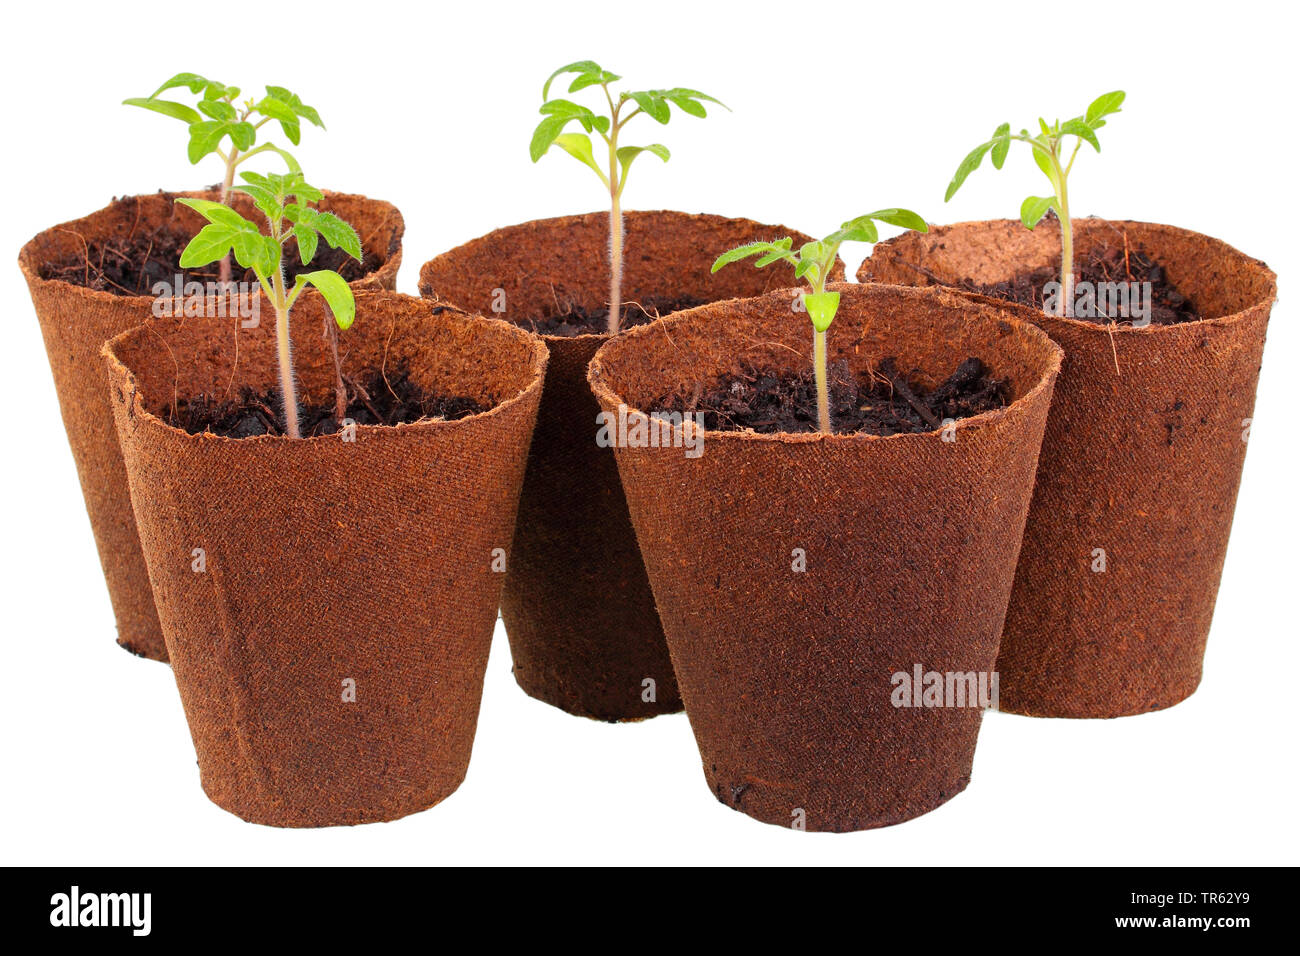 Young Tomato Plants High Resolution Stock Photography and Images - Alamy